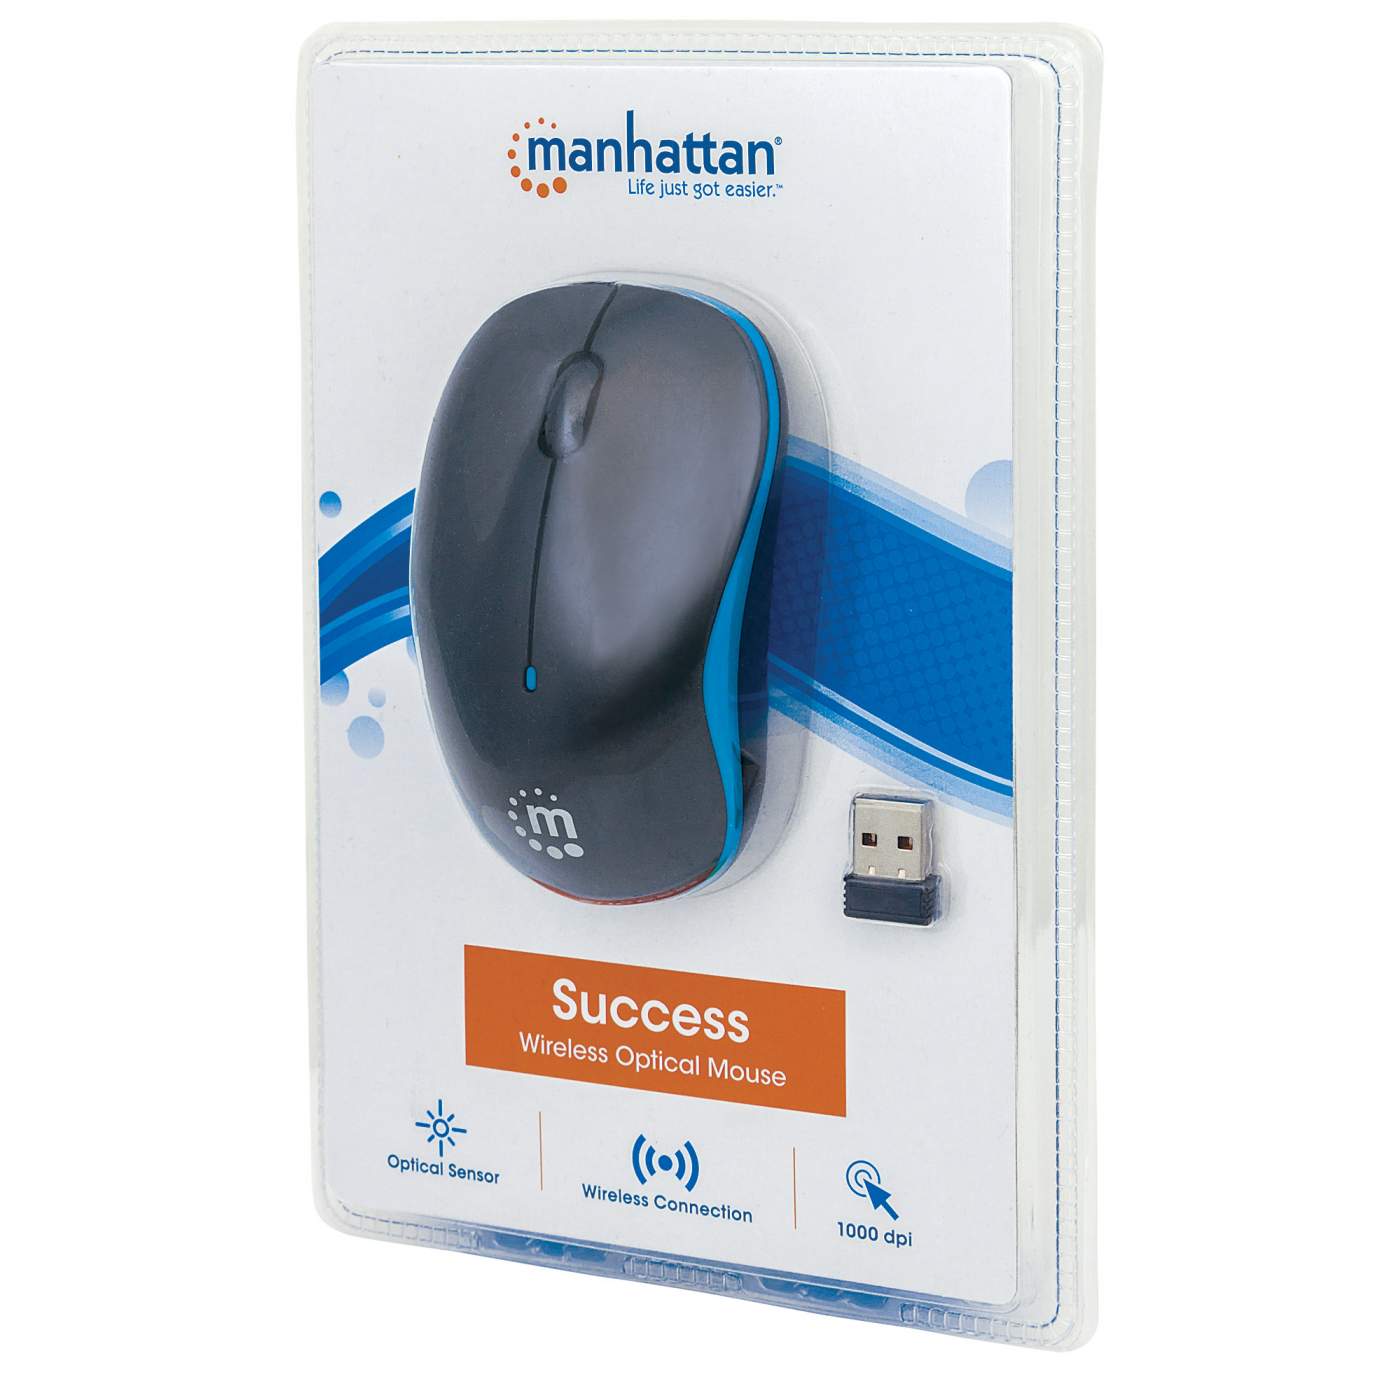 Success Wireless Optical Mouse Packaging Image 2